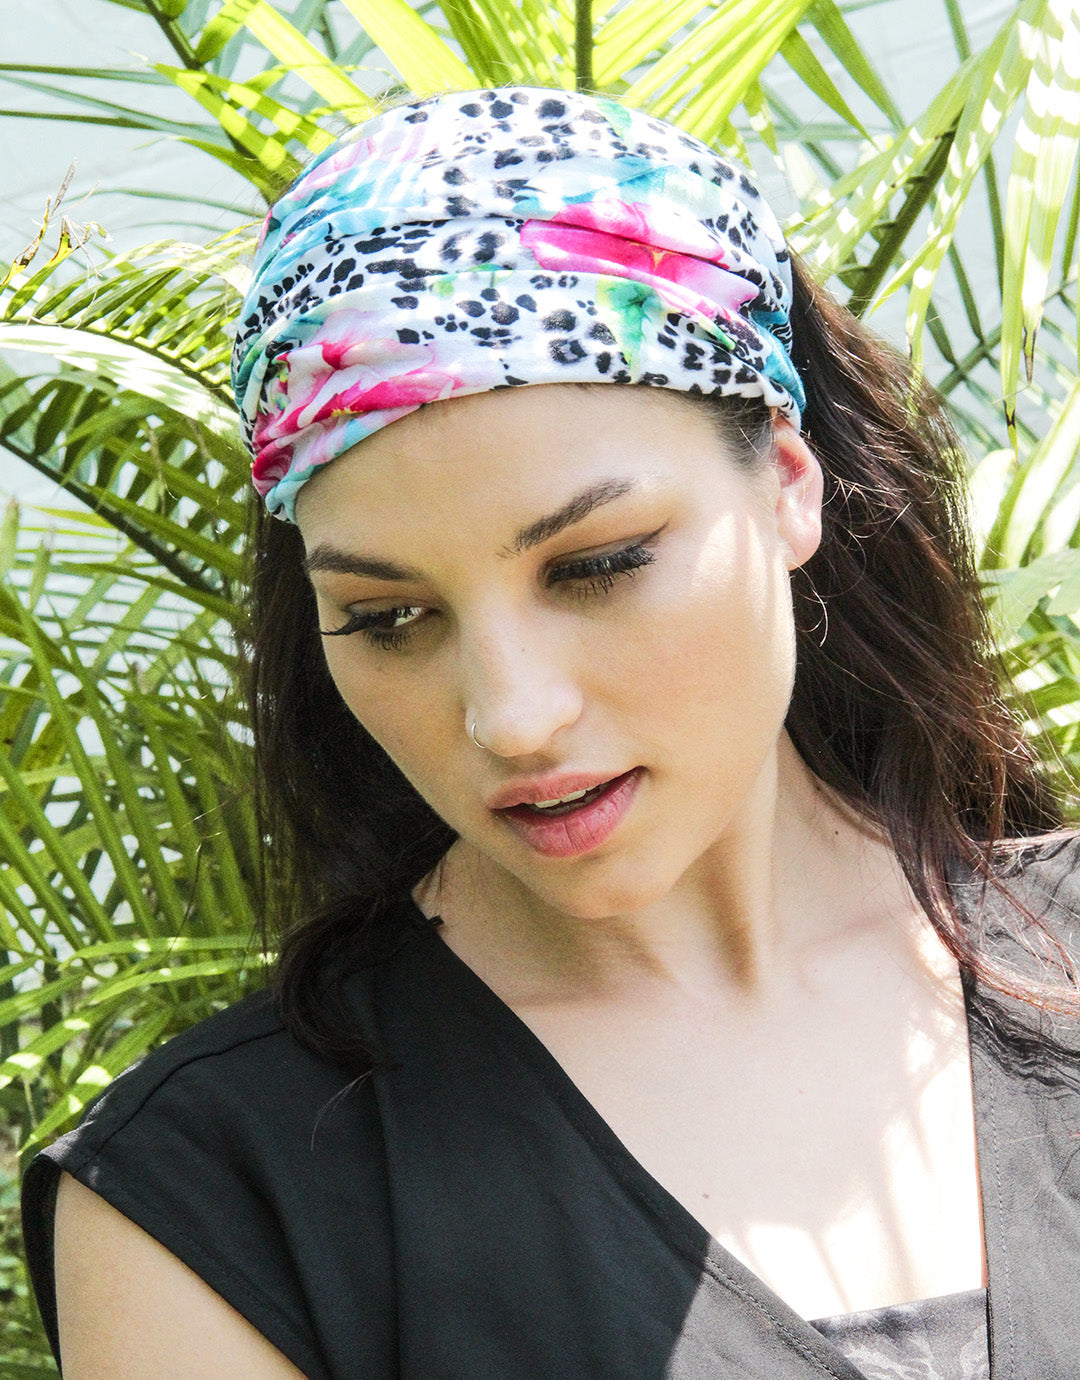 BANDED Women’s Headwraps + Hair Accessories - Animal Isle - Infinity Headwrap